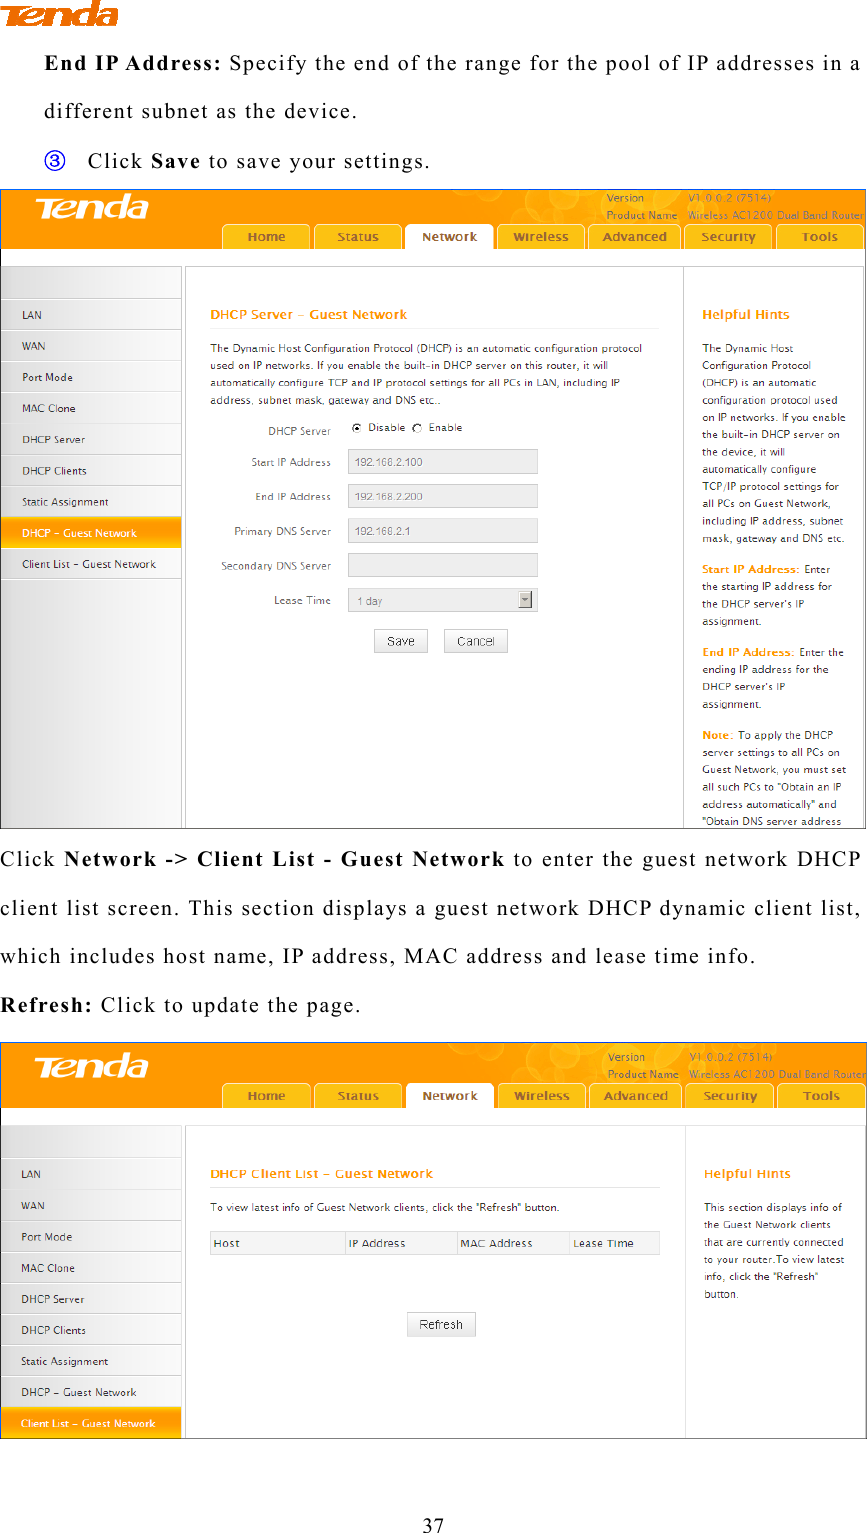           37 End IP Address: Specify the end of the range for the pool of IP addresses in a different subnet as the device. ③ Click Save to save your settings.  Click Network -&gt; Client List - Guest Network to enter the guest network DHCP client list screen. This section displays a guest network DHCP dynamic client list, which includes host name, IP address, MAC address and lease time info.   Refresh: Click to update the page.  